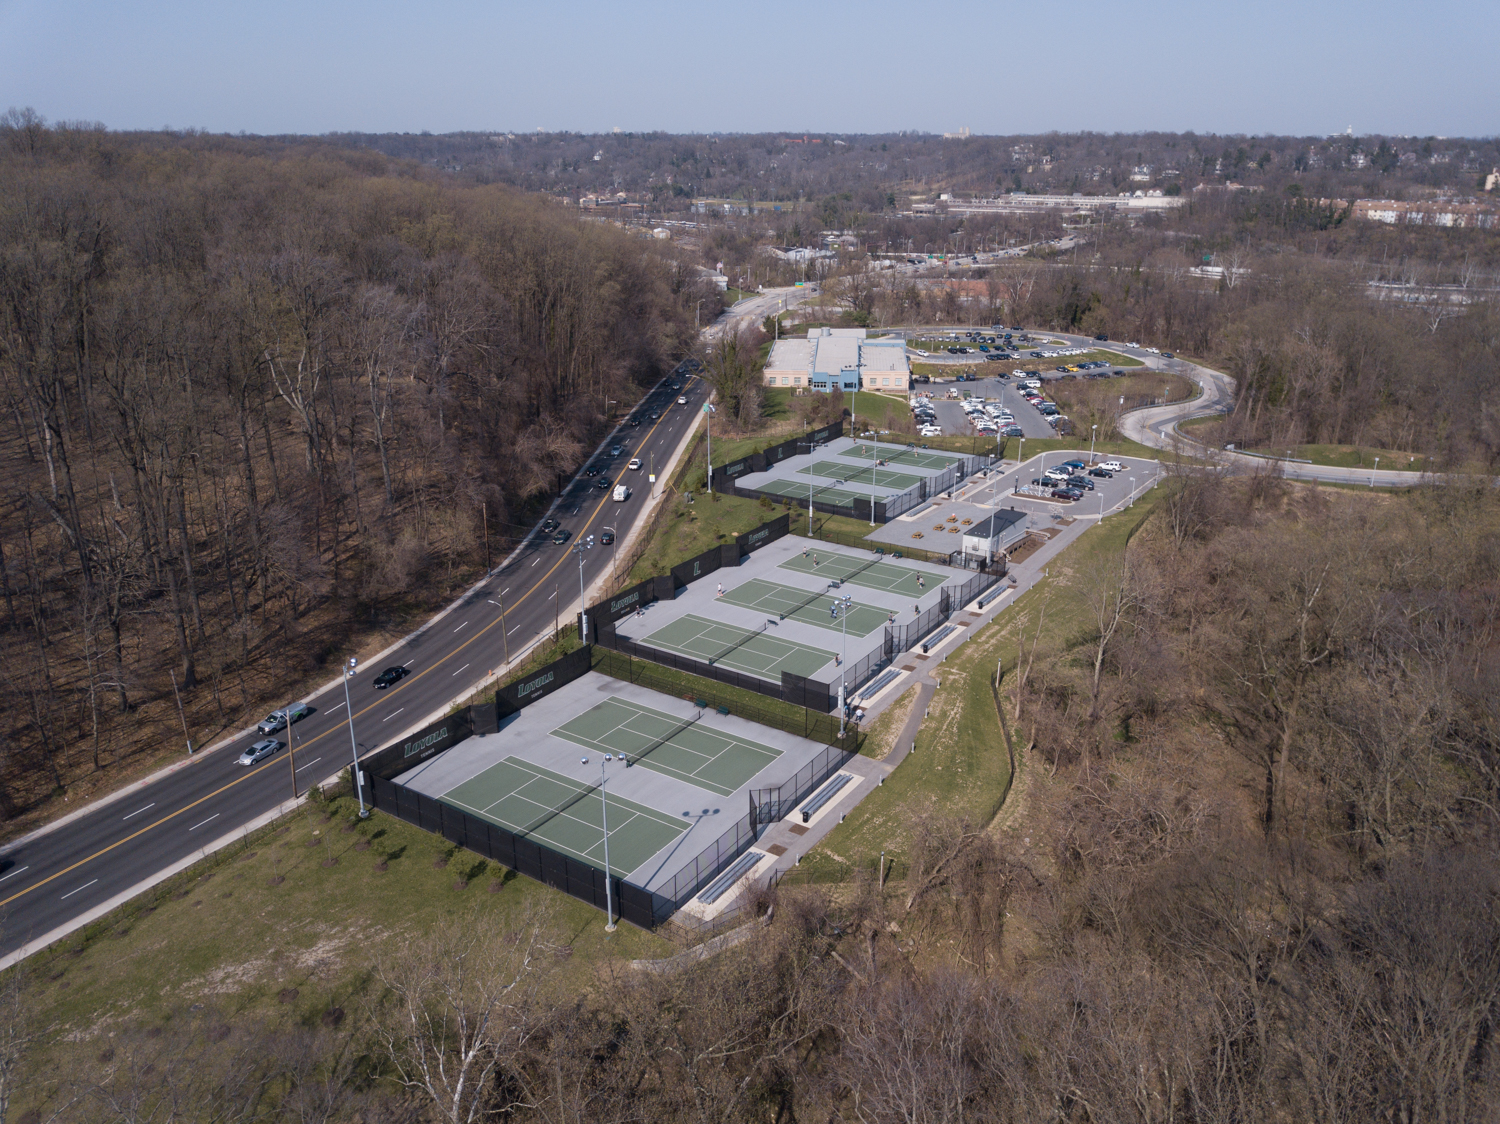 Overhead view of tennis facility